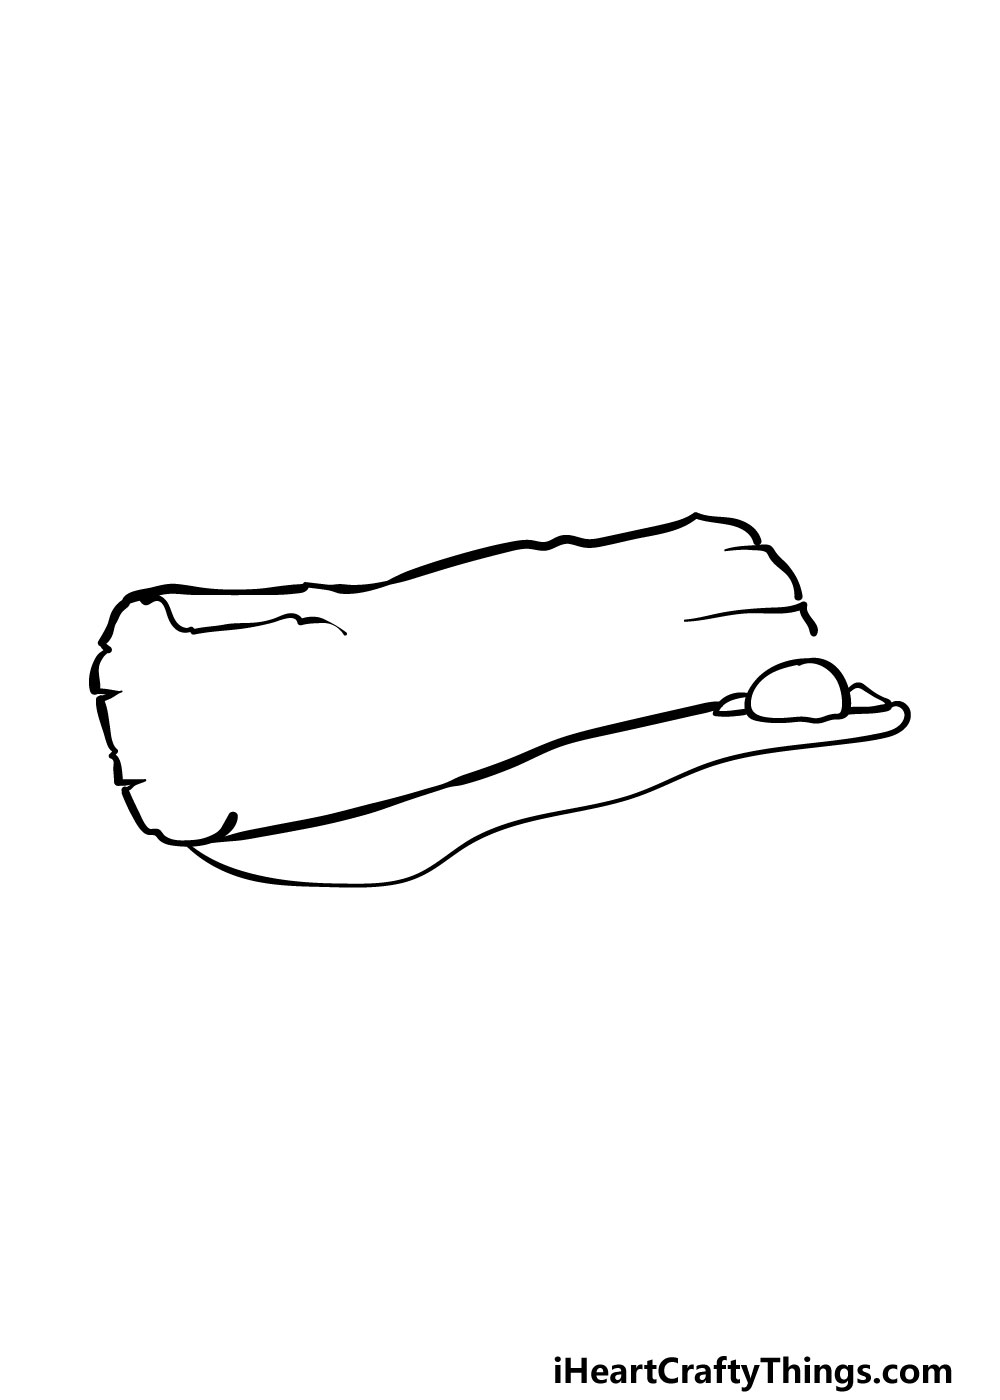 how to draw a log step 3